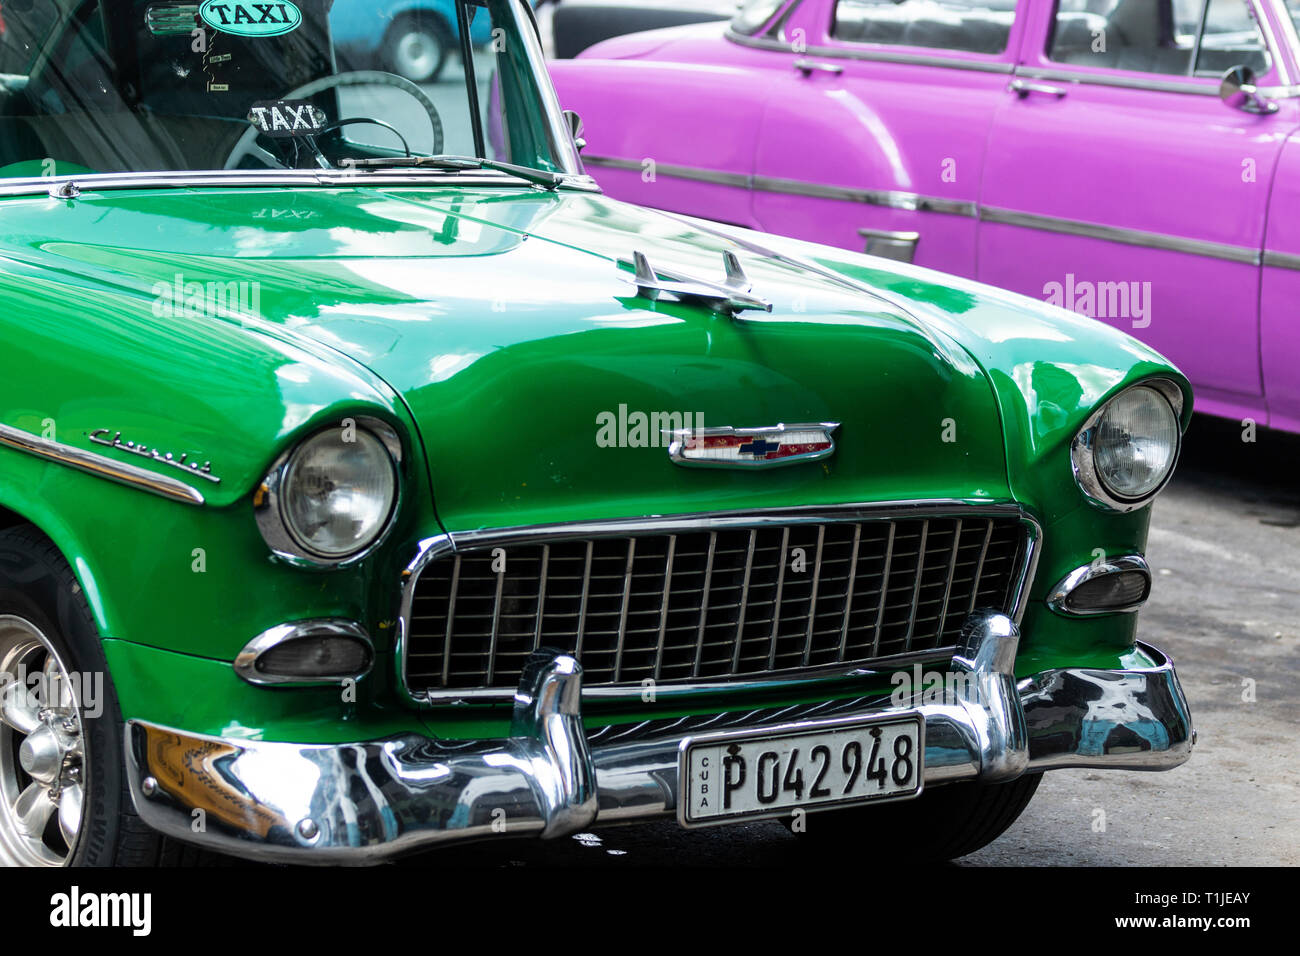 Havana, Cuba - 25 July 2018: The front end of a green classic Chevrolet Belair parked next to a purple classic car in Havana Cuba. Stock Photo